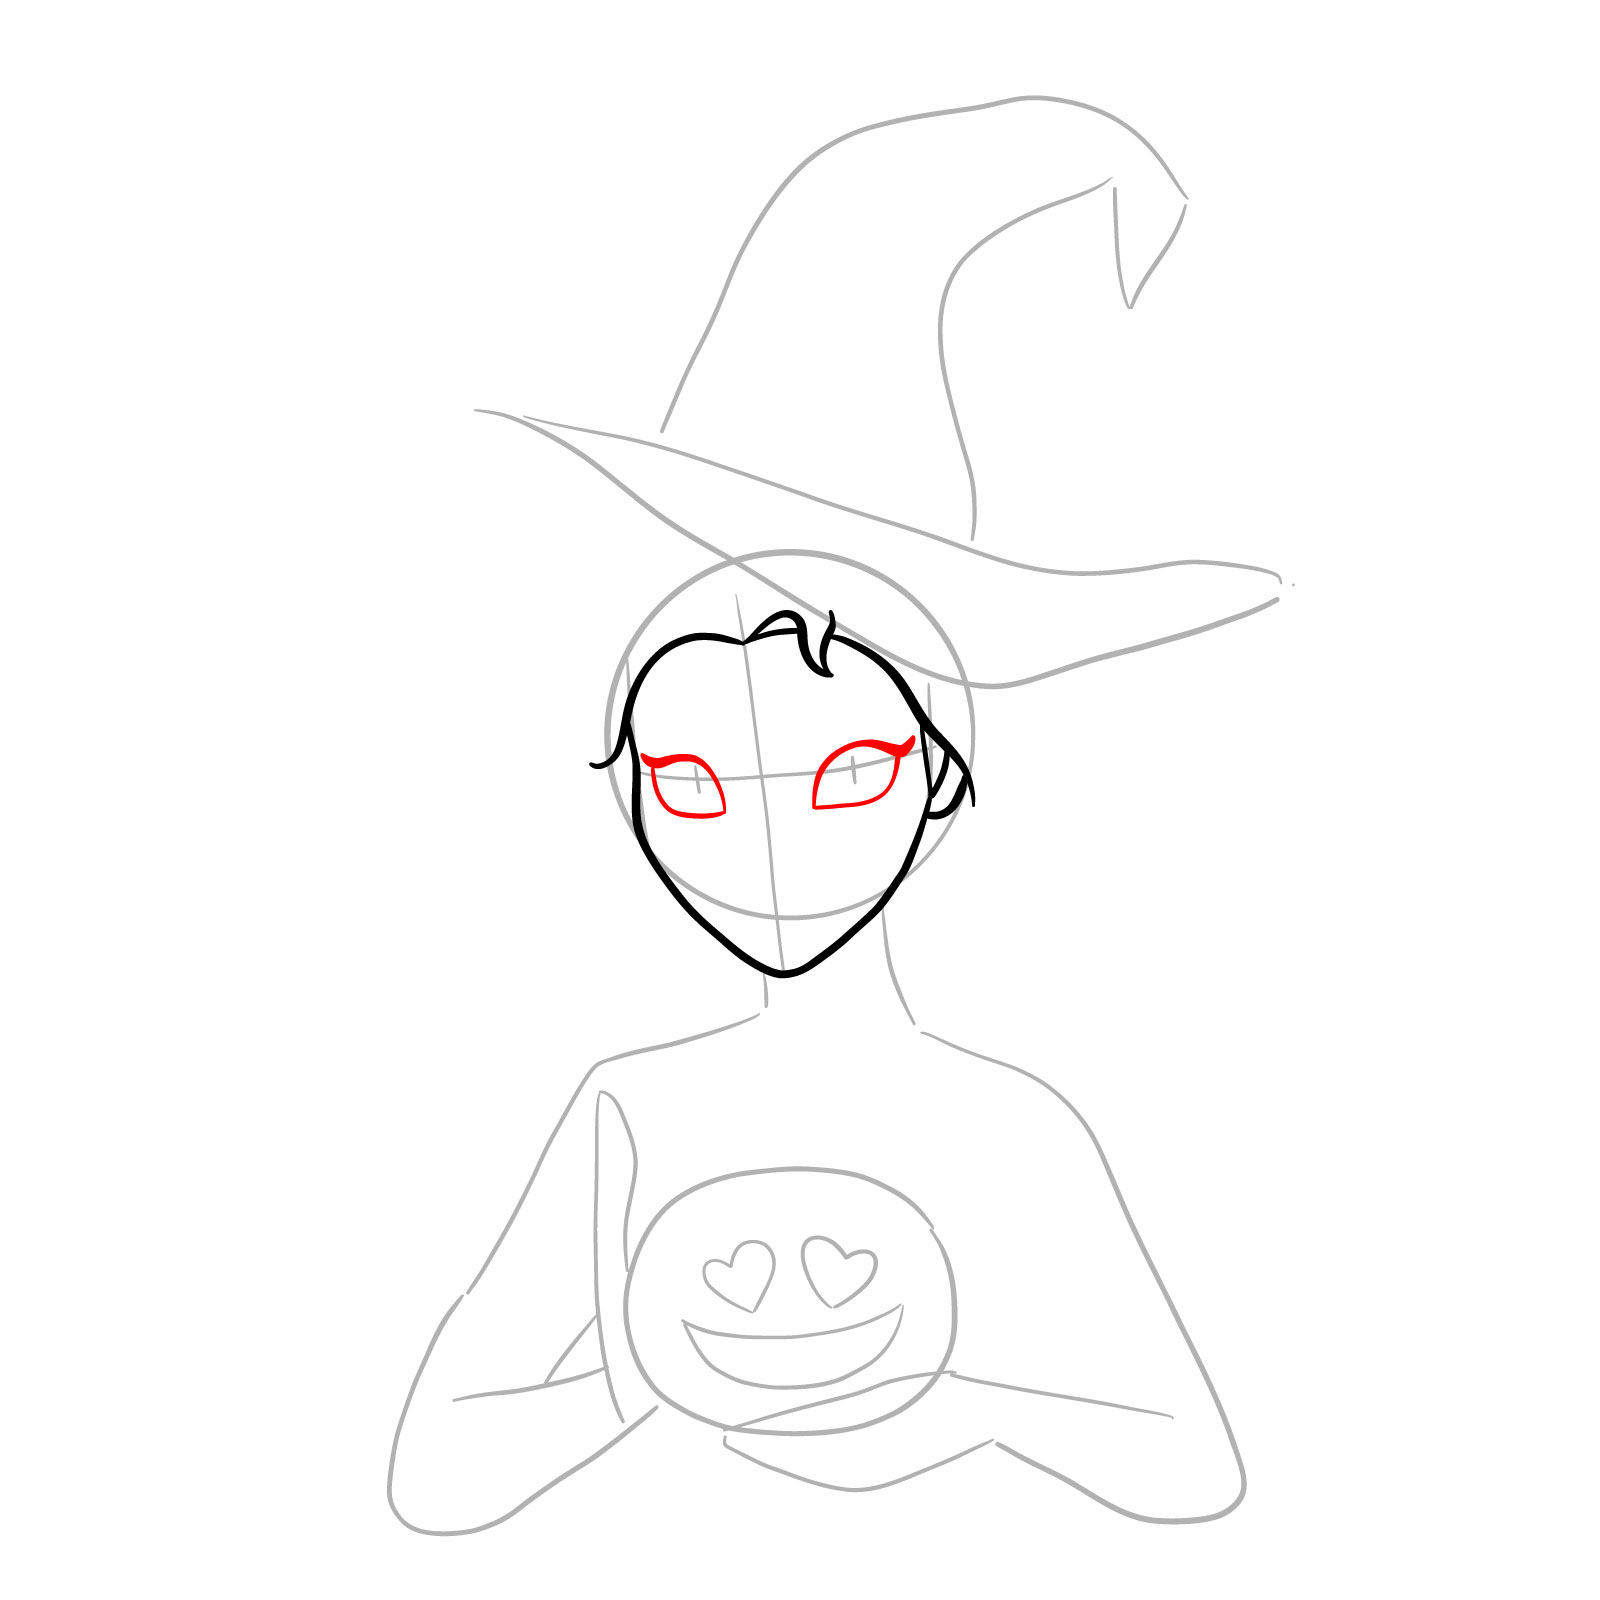 How to Draw Witch Elsa on Halloween - step 07